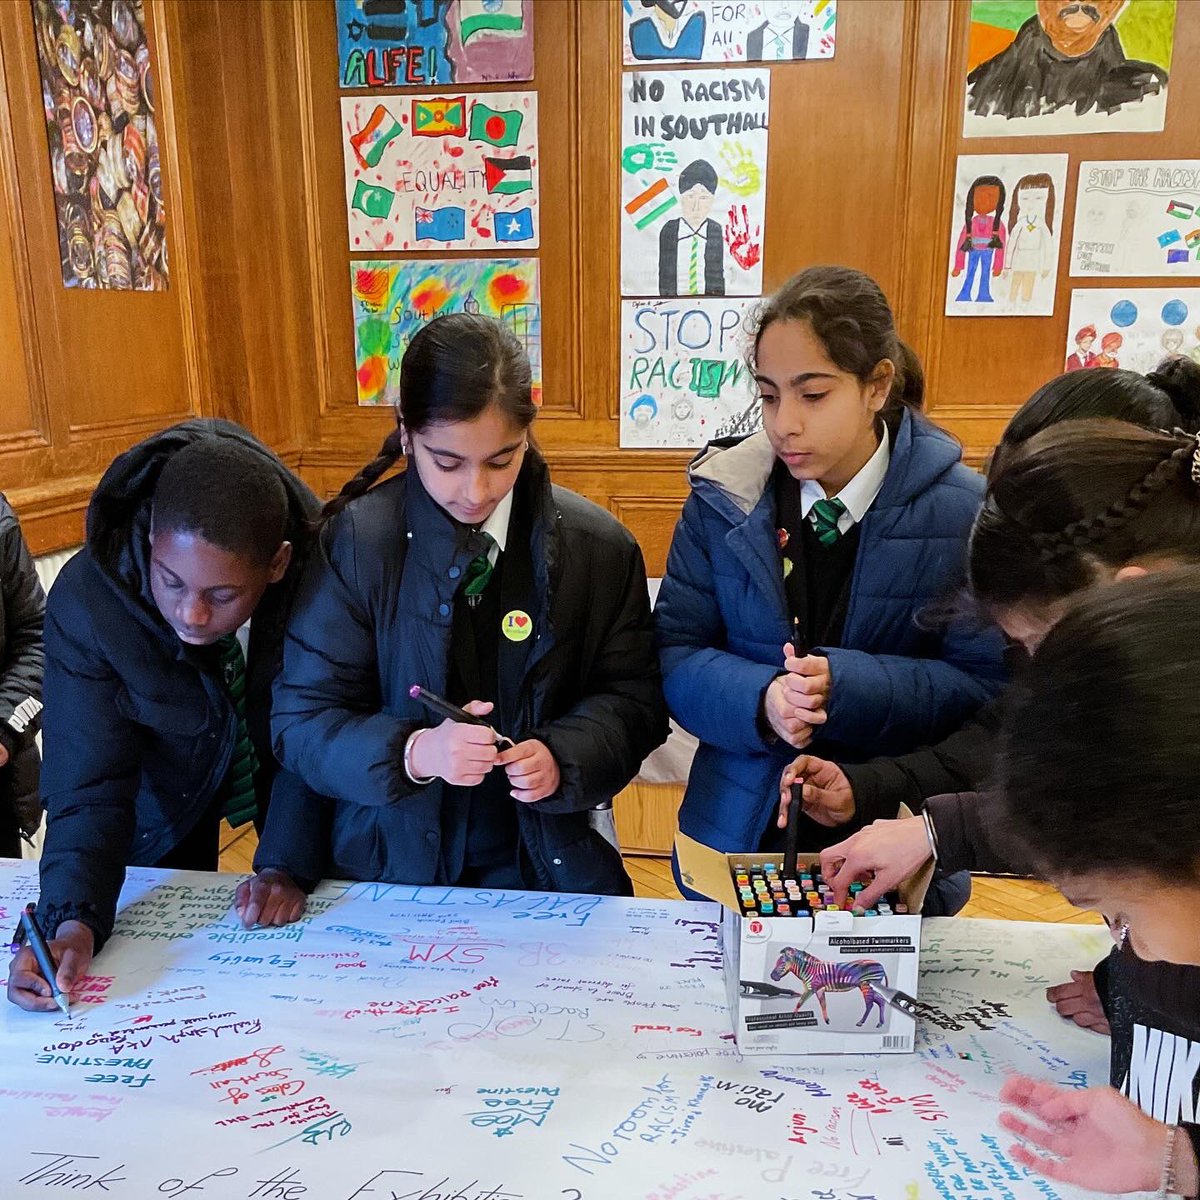 Year 7s joined 100s of other children for the Southall Resists Day to mark the 45th anniversary of the Southall uprising and death of Blair Peach. A truly memorable day. @SouthallCommAll @JohnLyonCharity @AHRC_India @UArts @VHSchool #southallresists